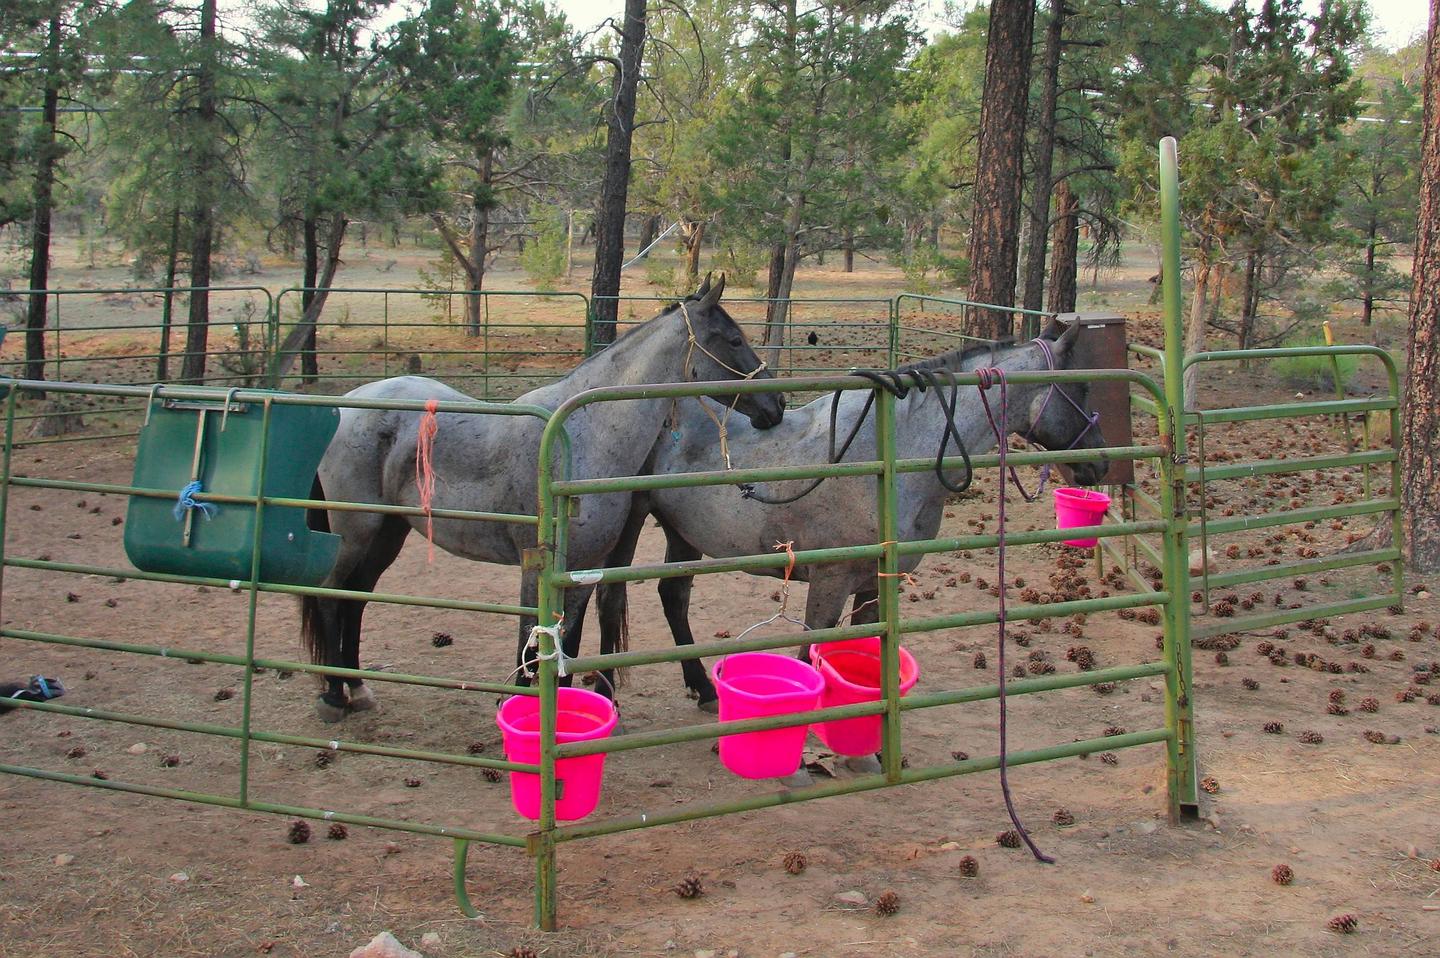 Horses in the corral.